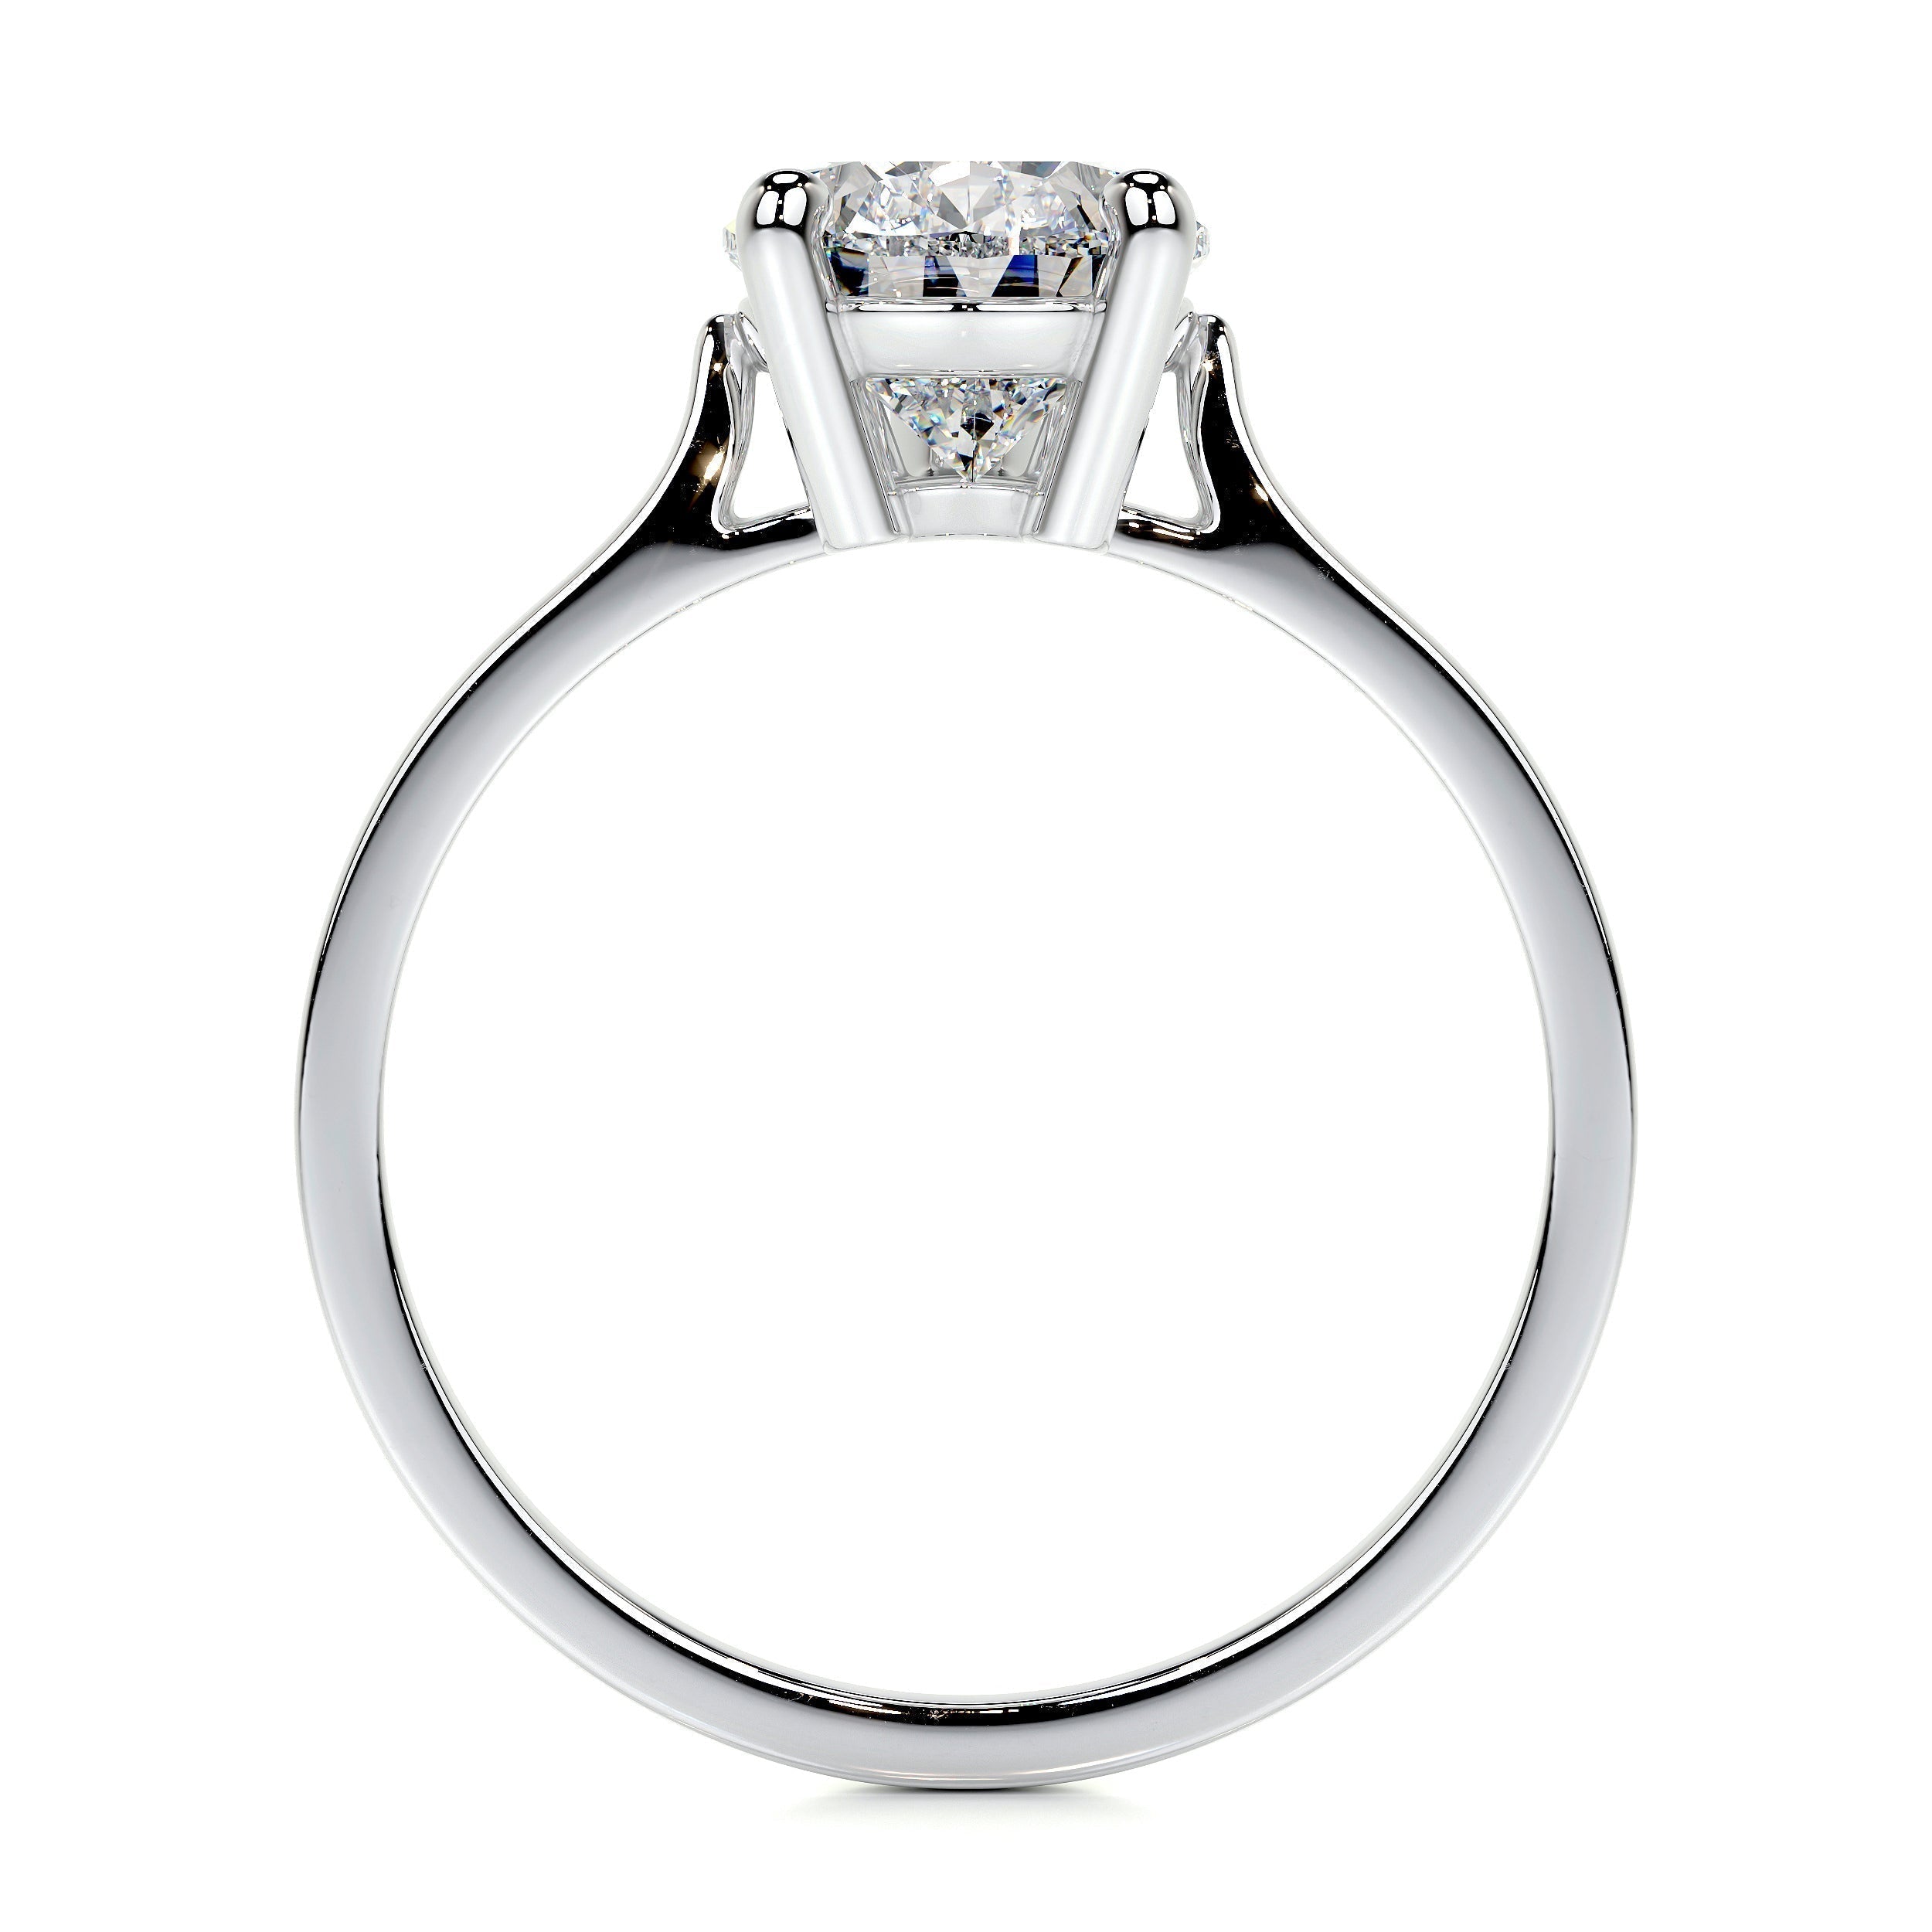 2.0 CT Round Solitaire CVD E/VS2 Diamond Engagement Ring 46